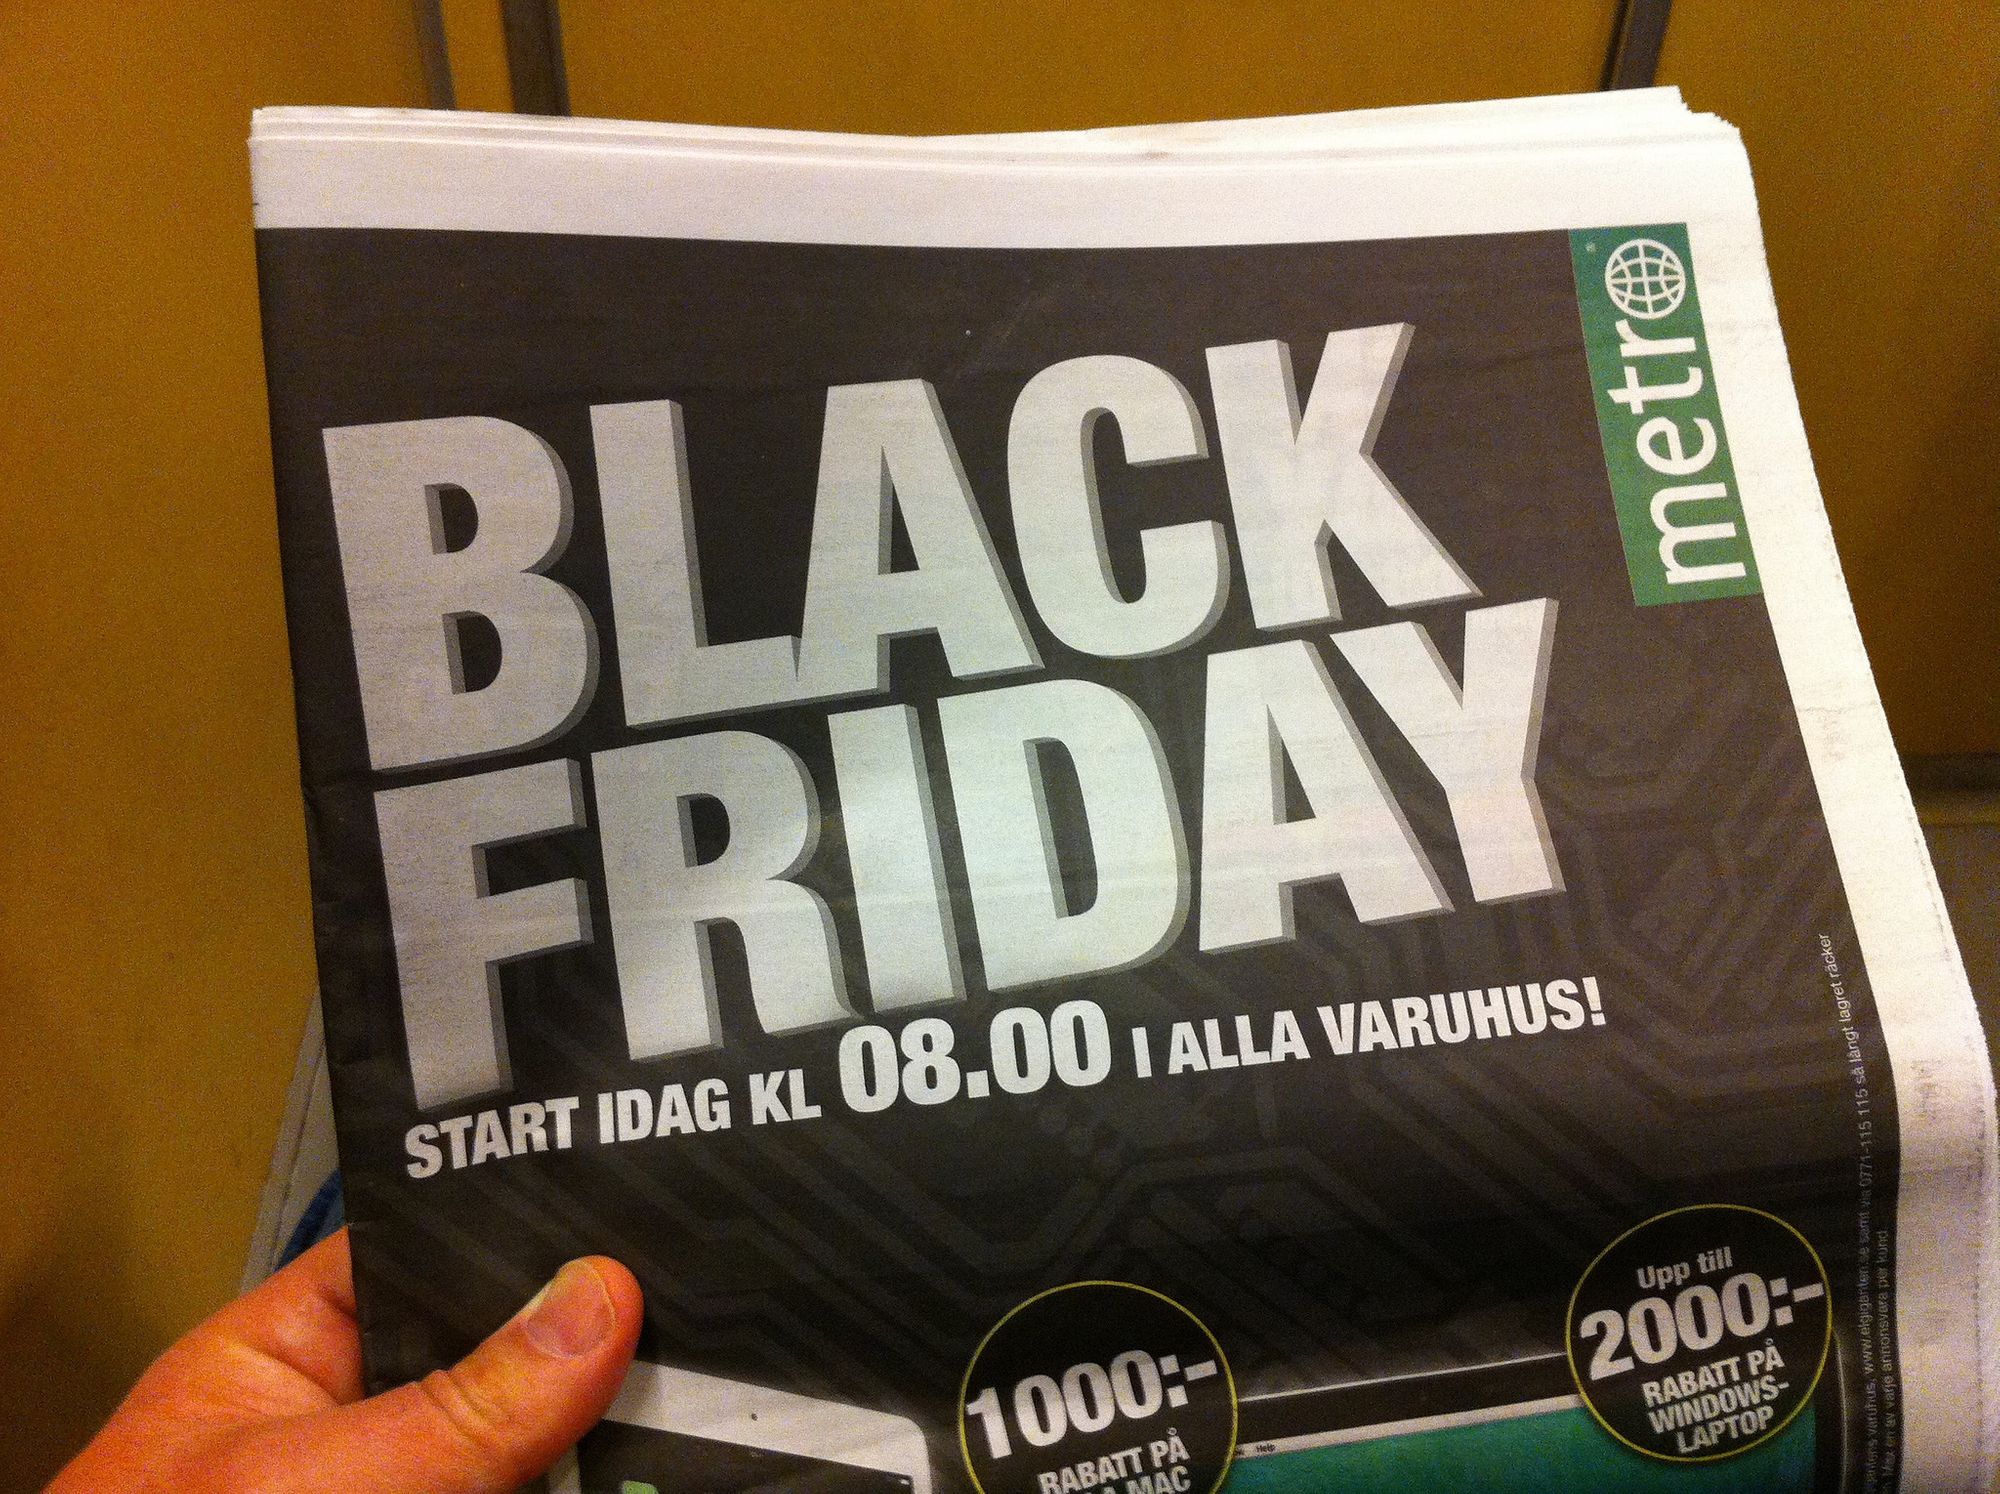 The truth about Black Friday and Cyber Monday